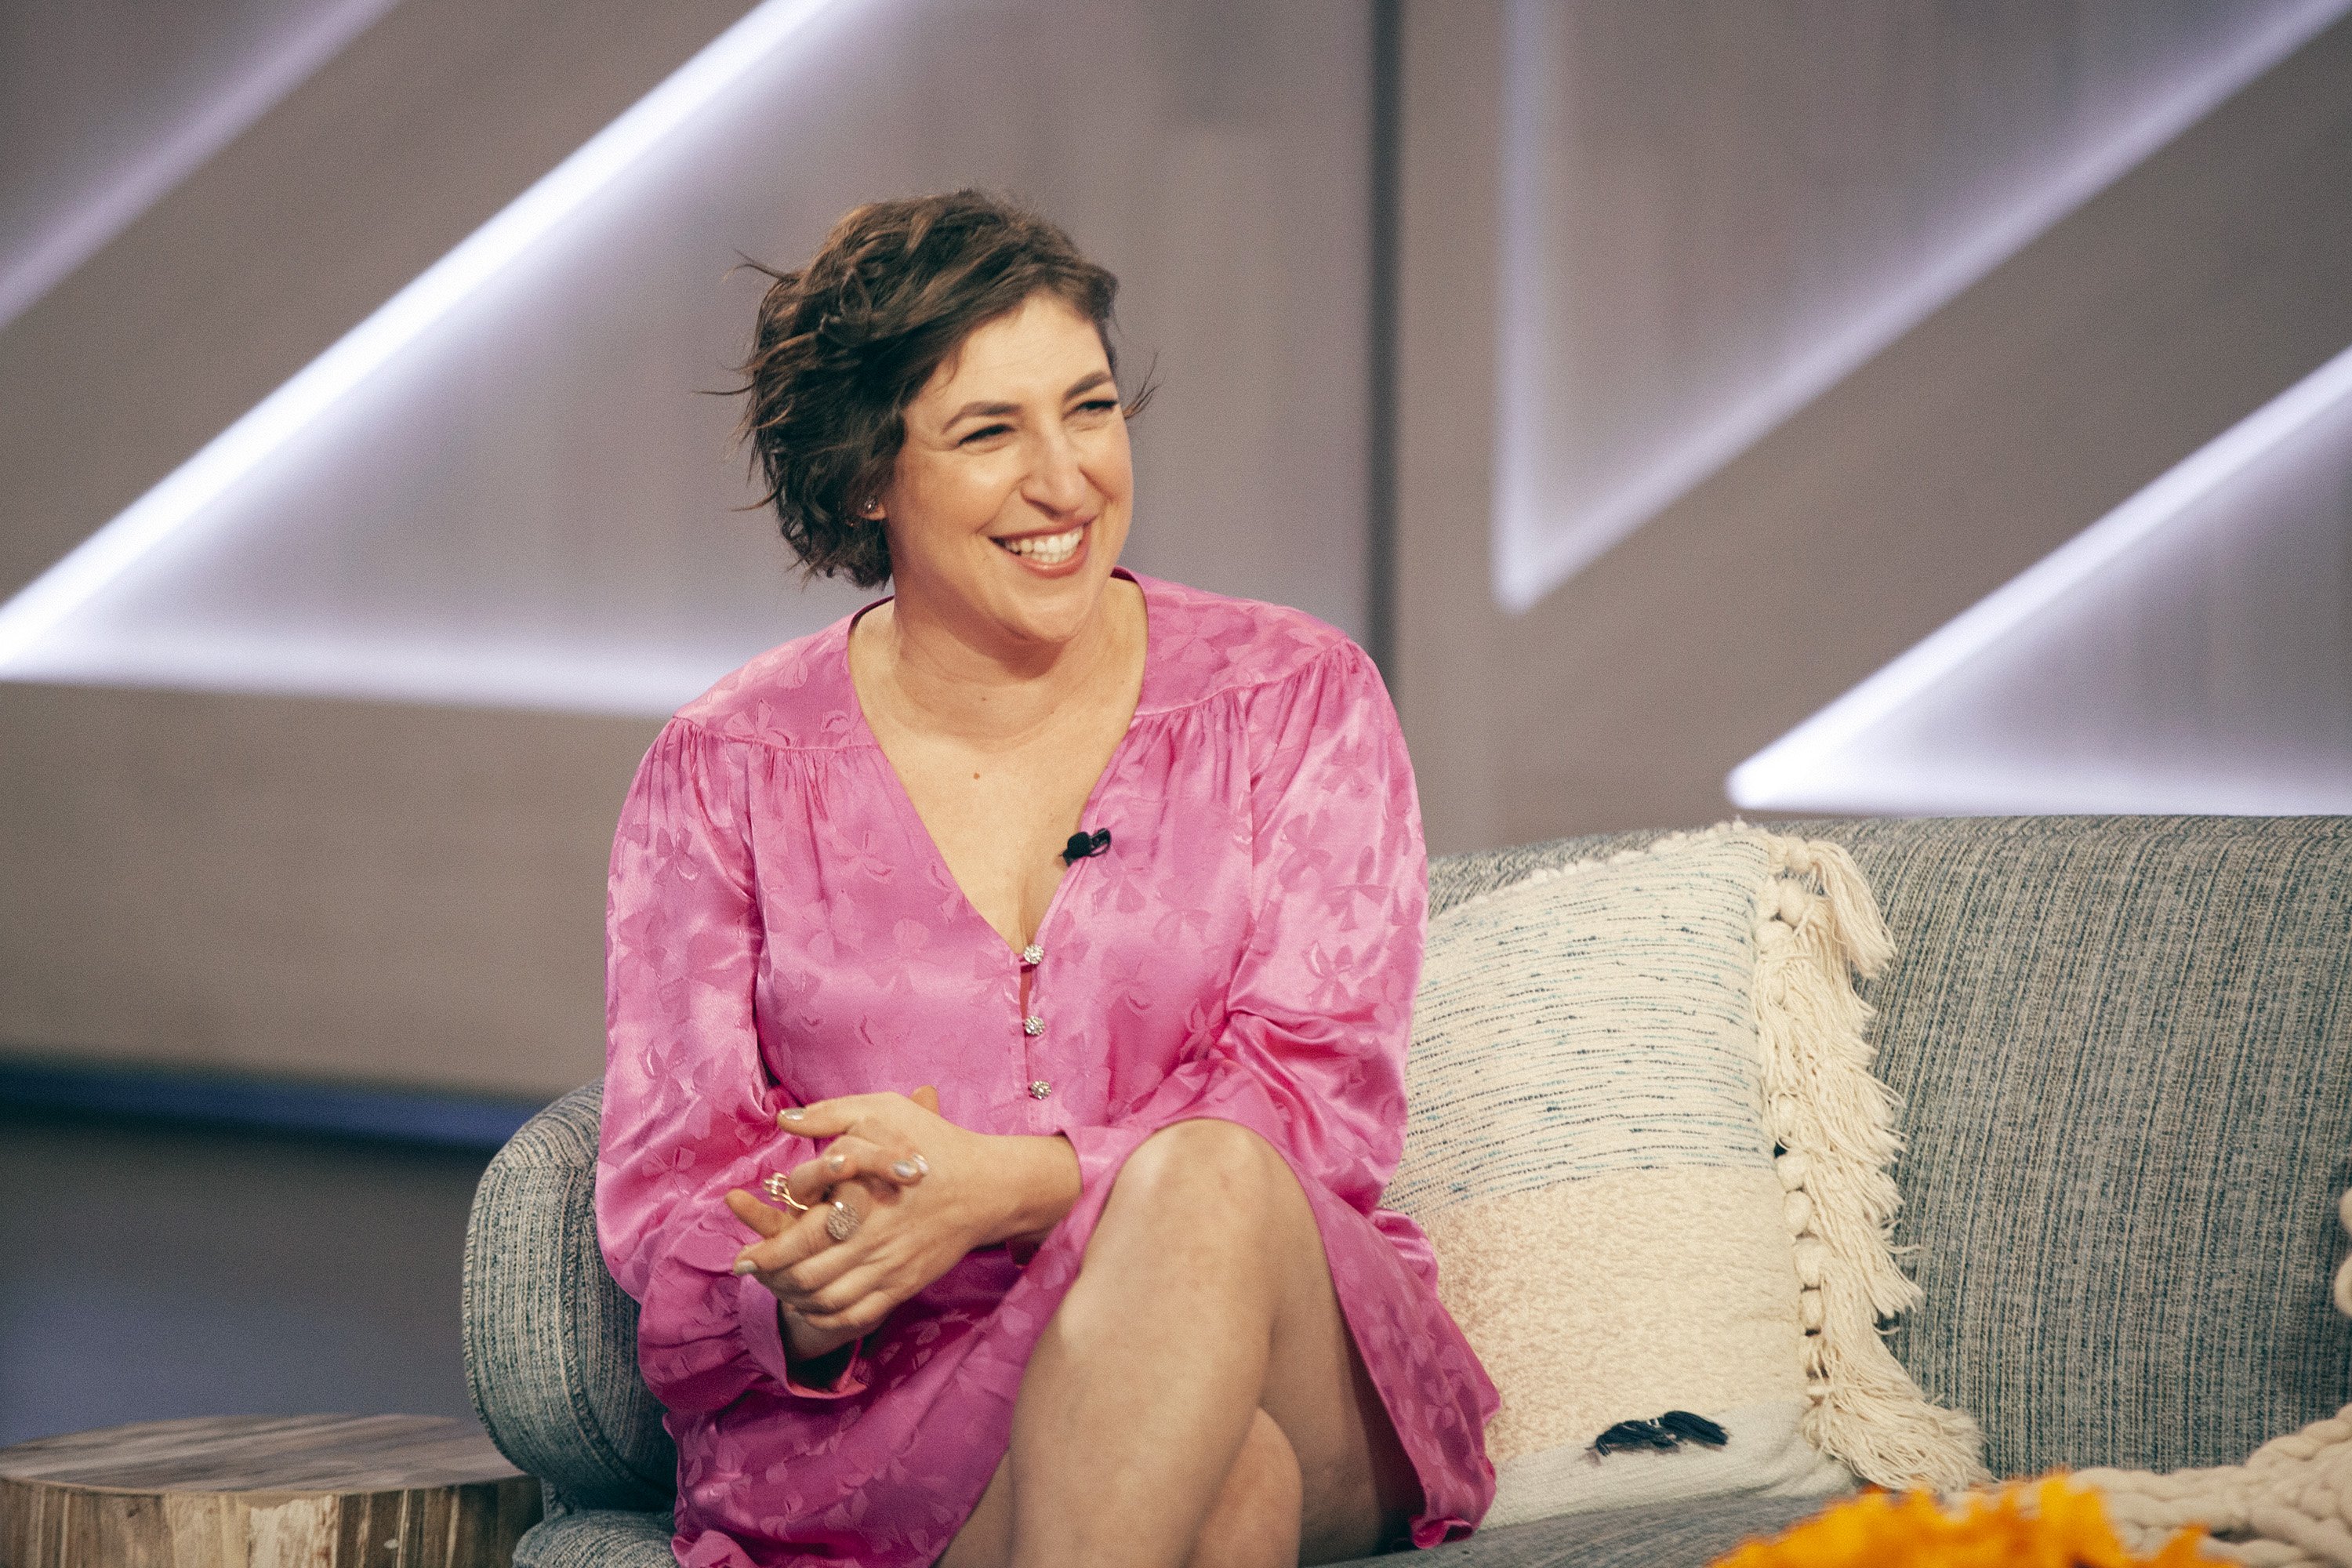 Actress Mayim Bialik on the "Kelly Clarkson Show" | Photo: Getty Images